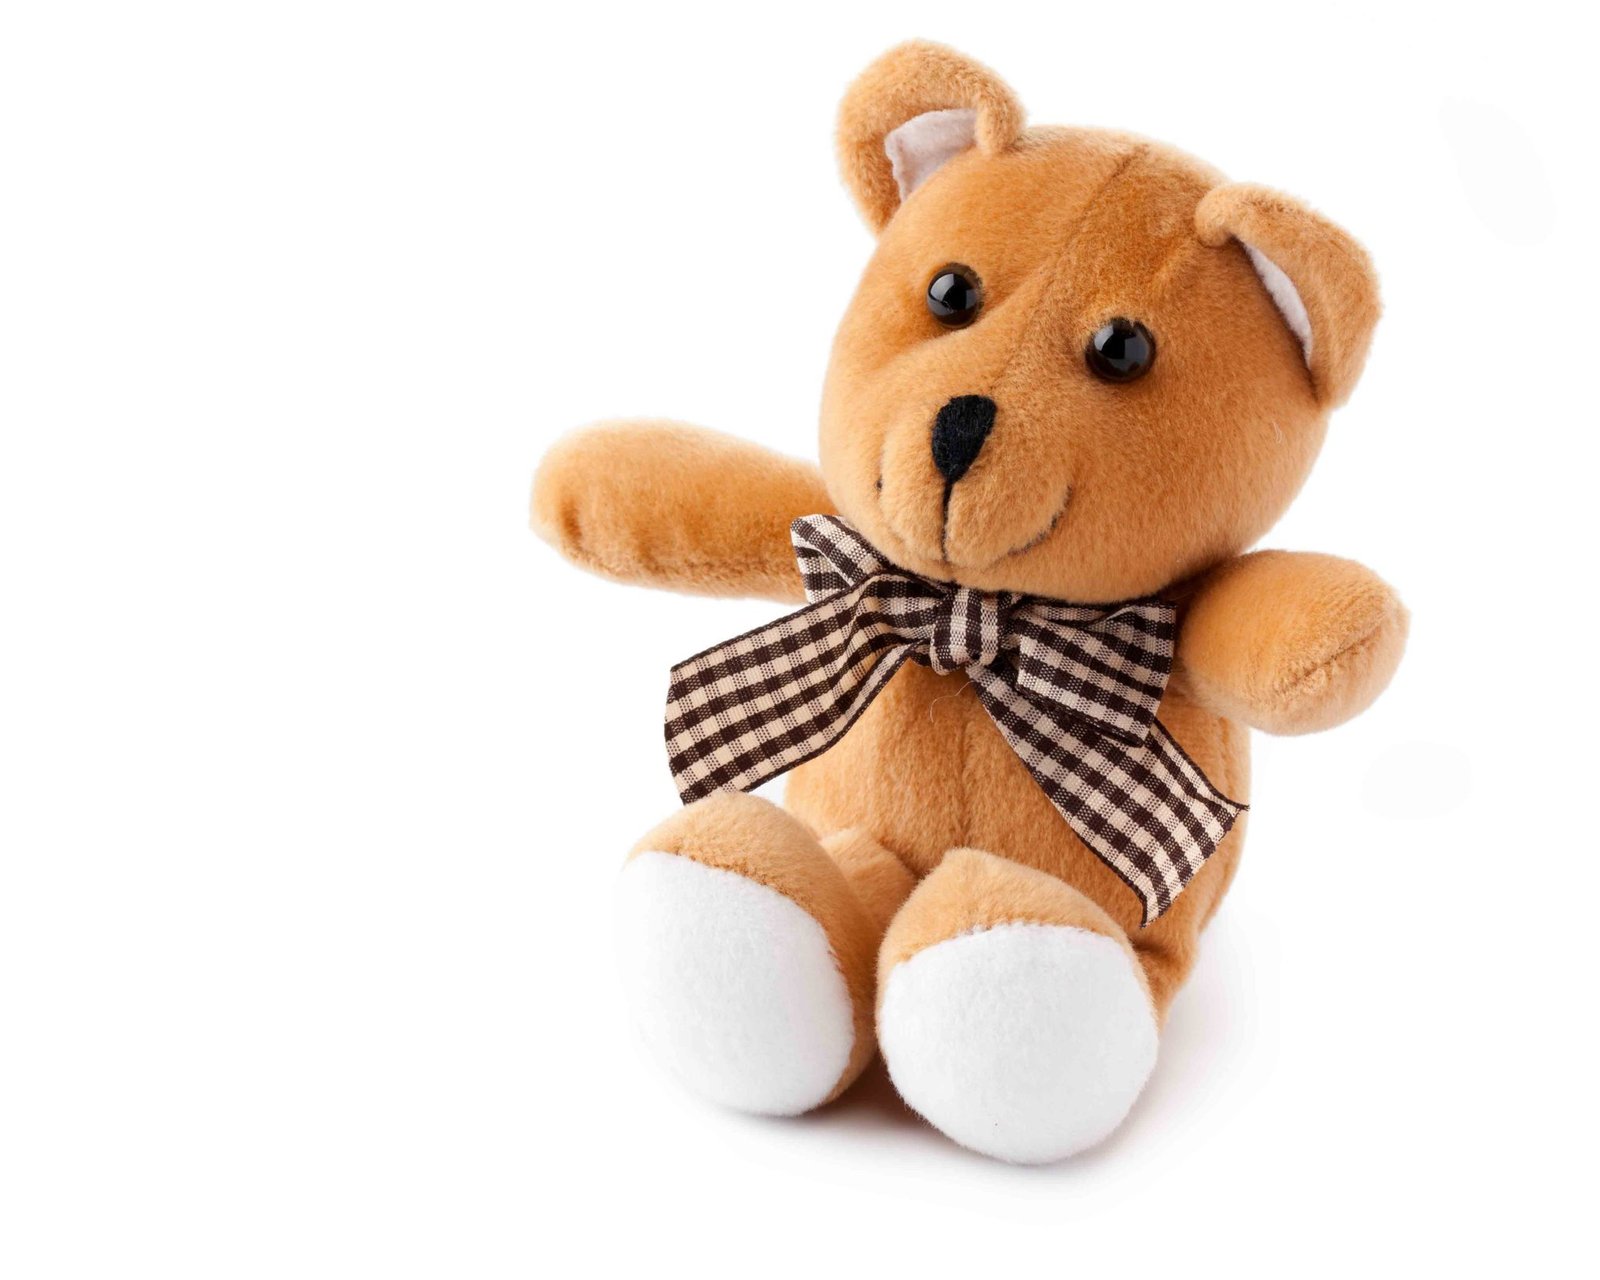 Learn How To Make Teddy Bear At Home